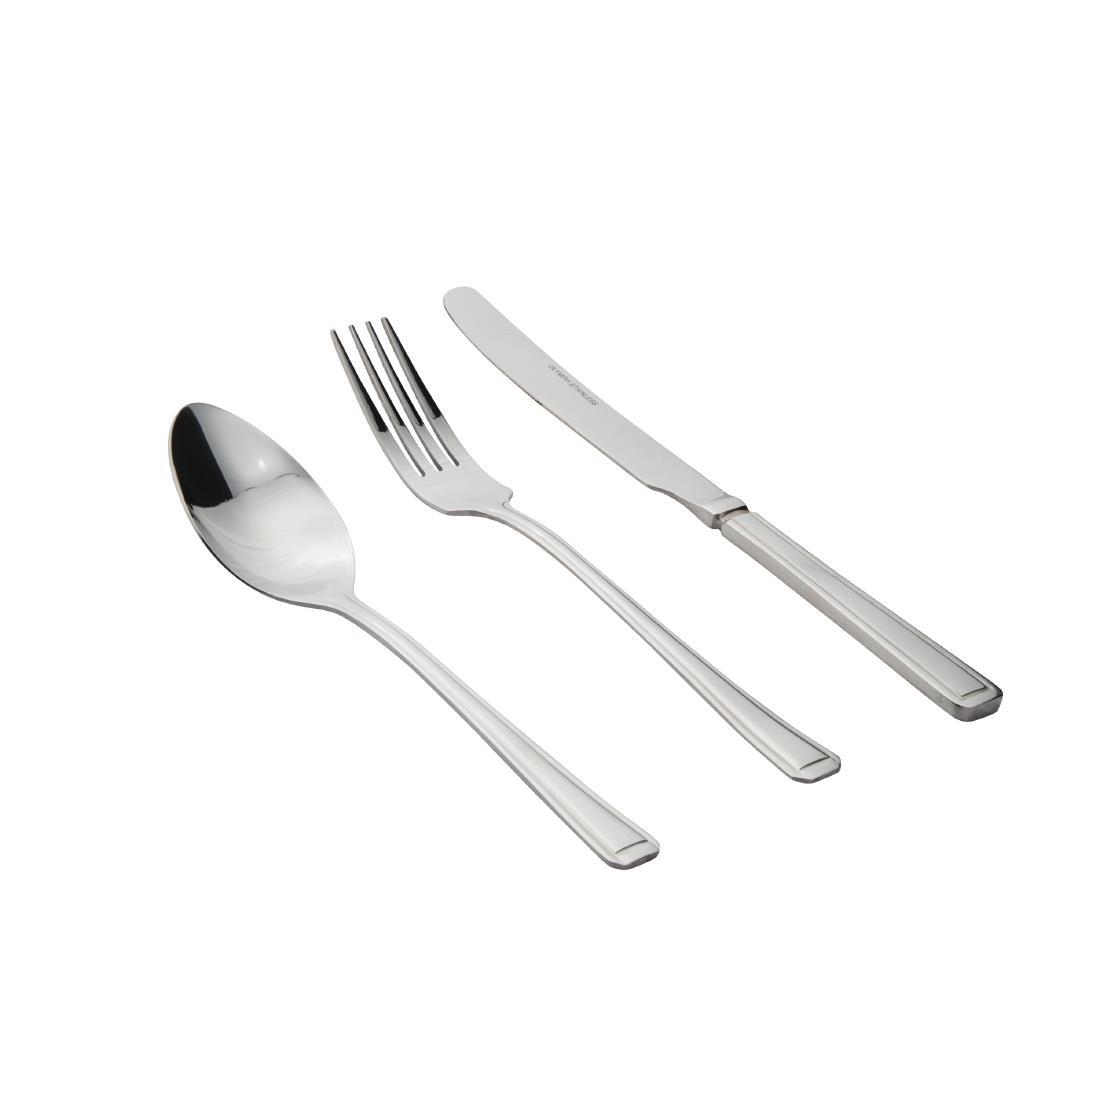 Olympia Harley Cutlery Sample Set (Pack of 3) - S383  - 2